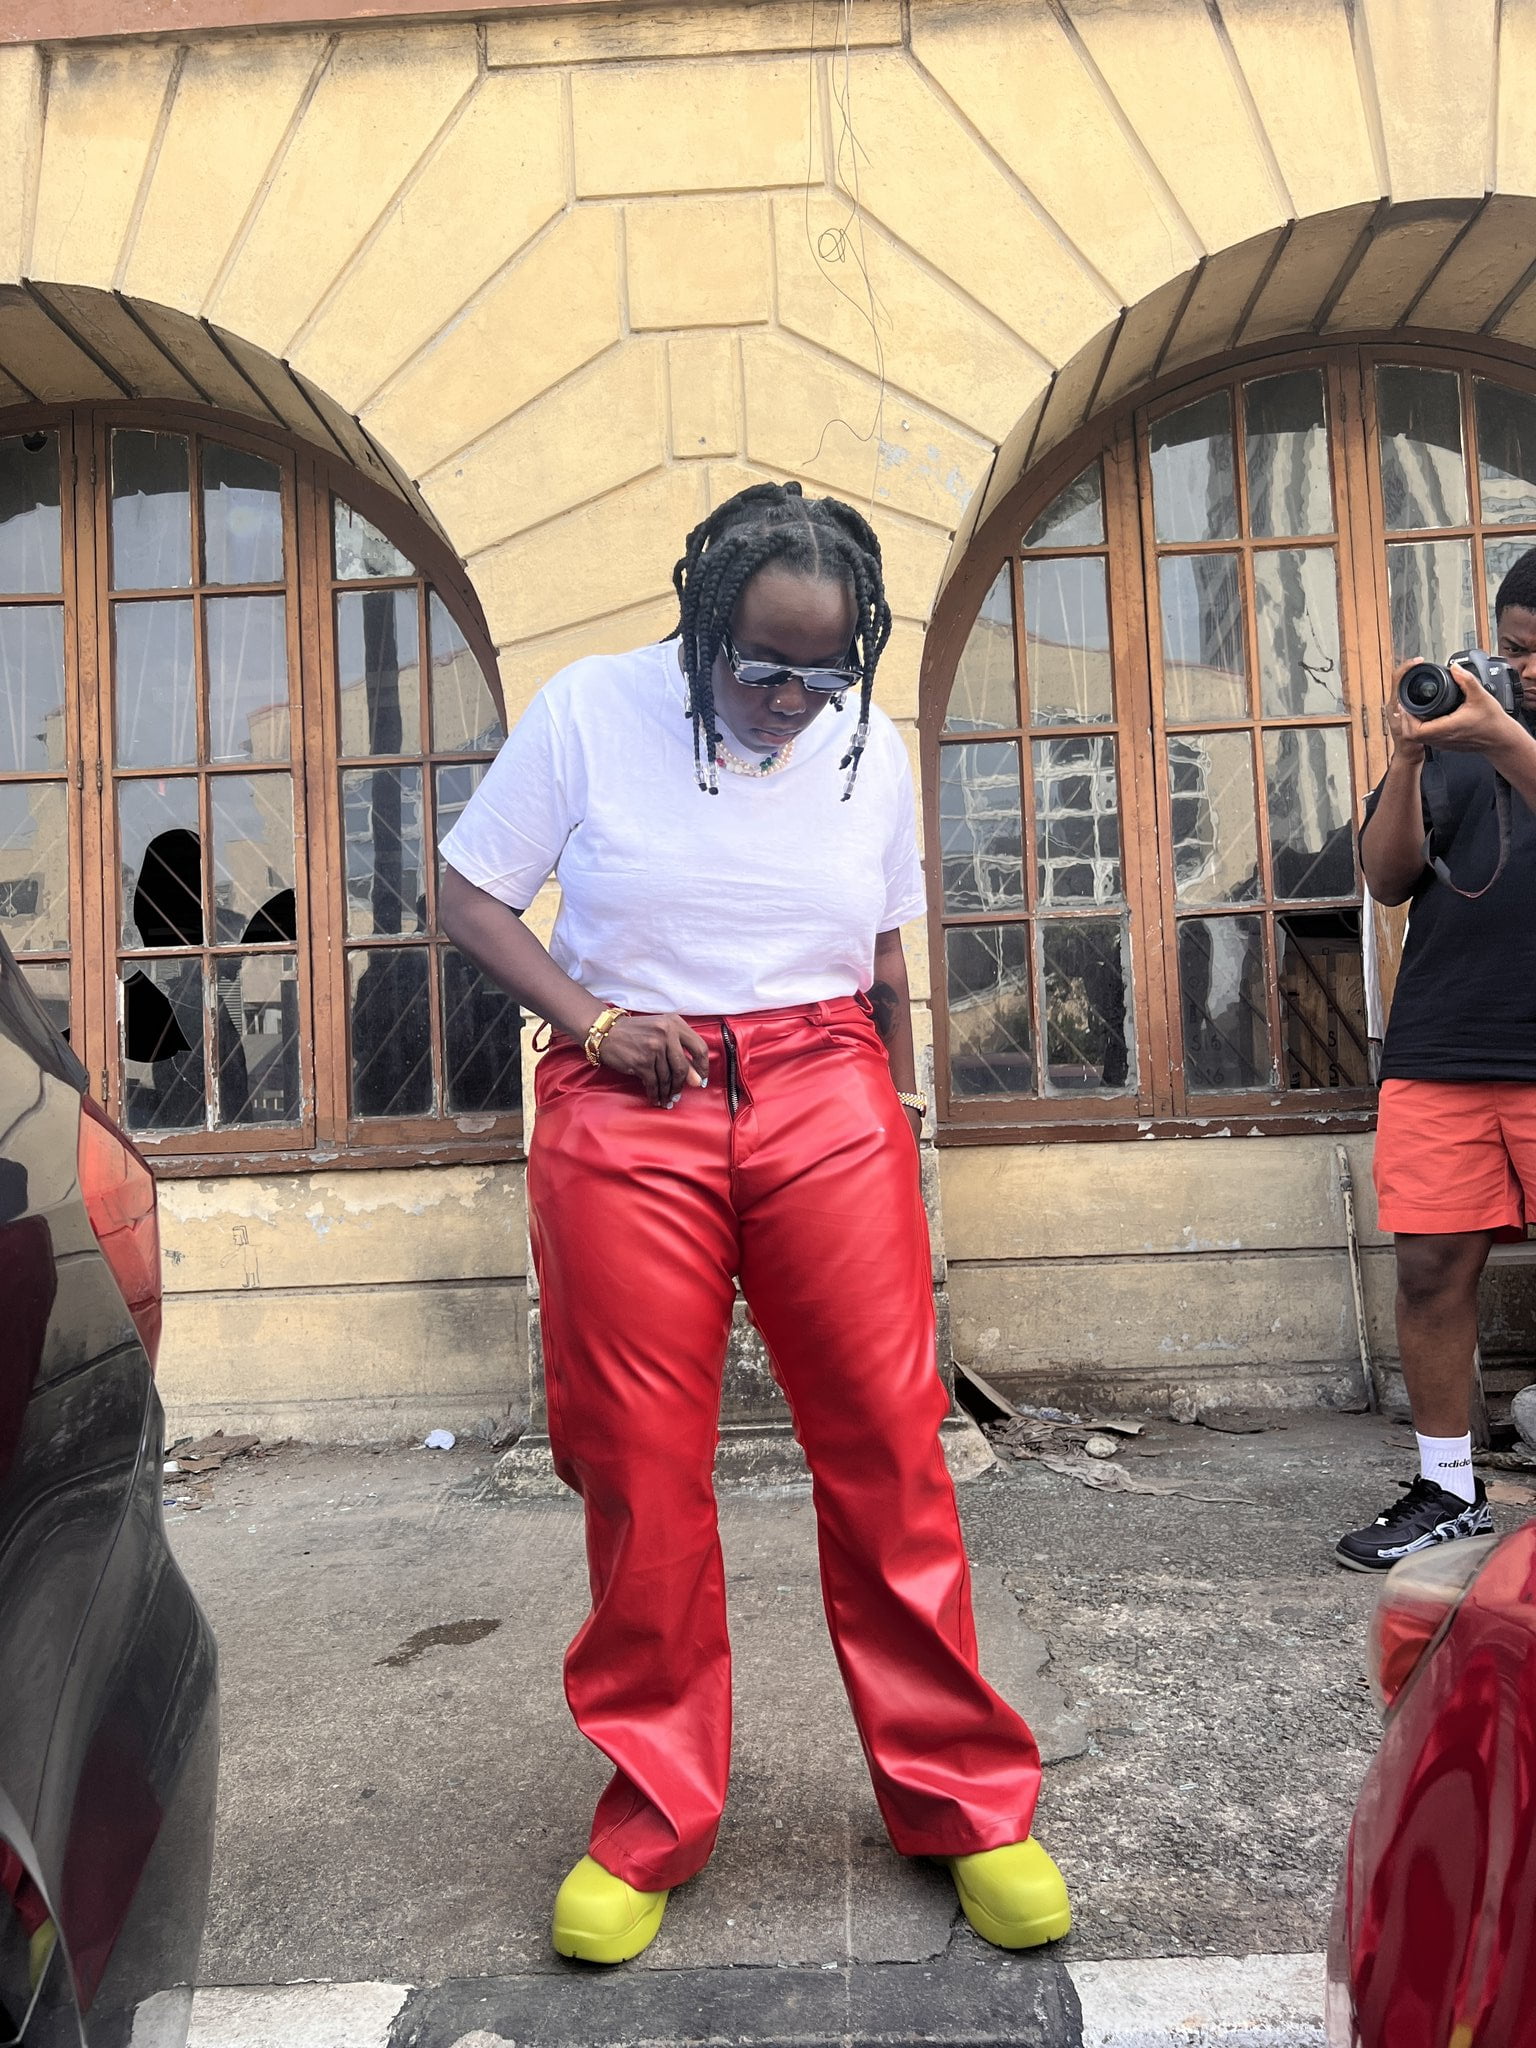 We prefer your former size - Fans disown Singer Teni’s recent weight loss [photos]